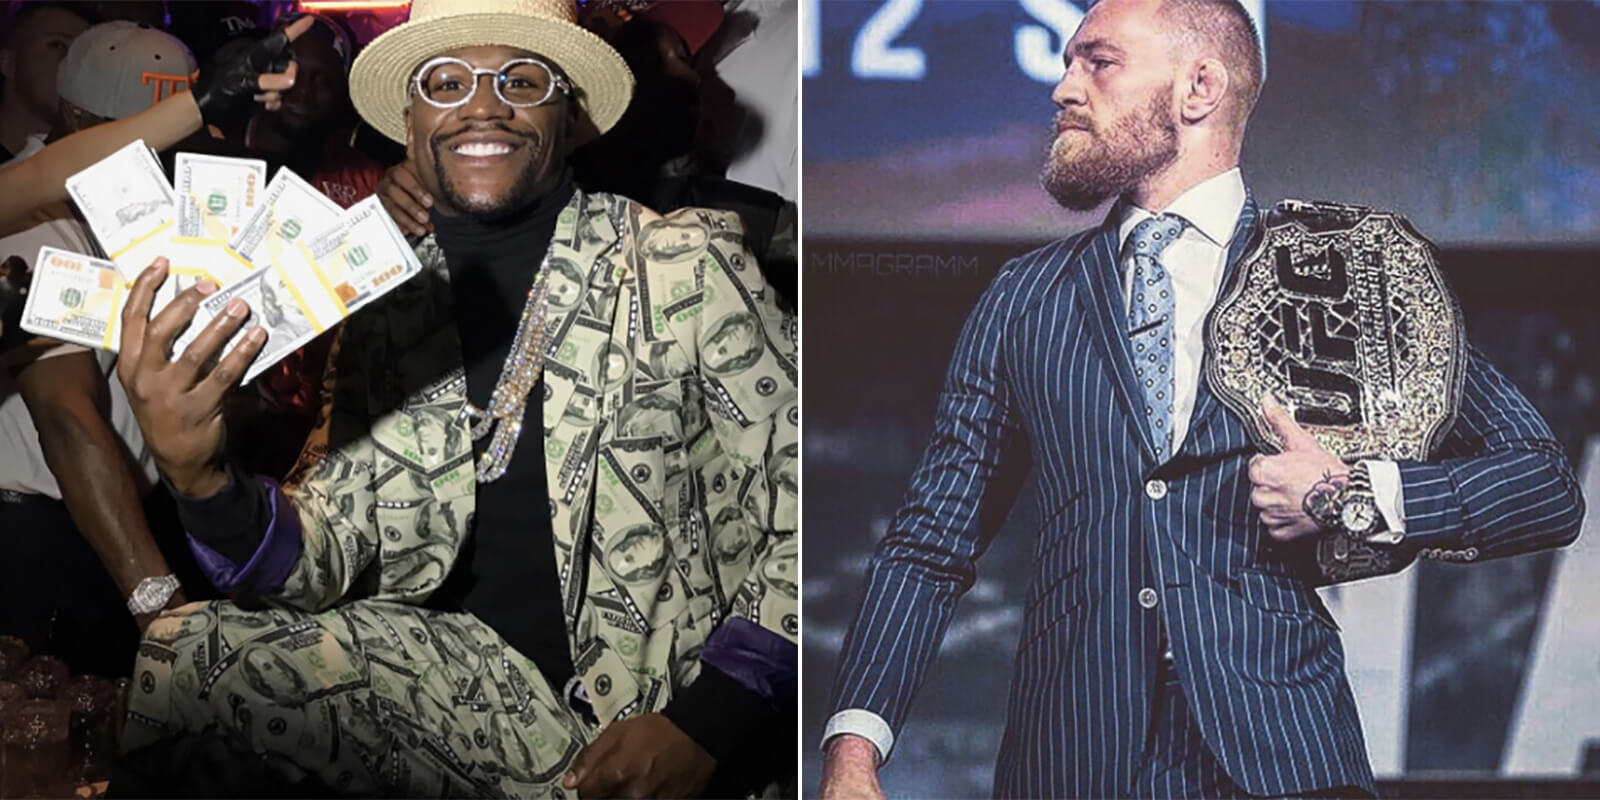 Floyd Mayweather Offers $10K On Instagram To Embarrass Conor McGregor1600 x 800